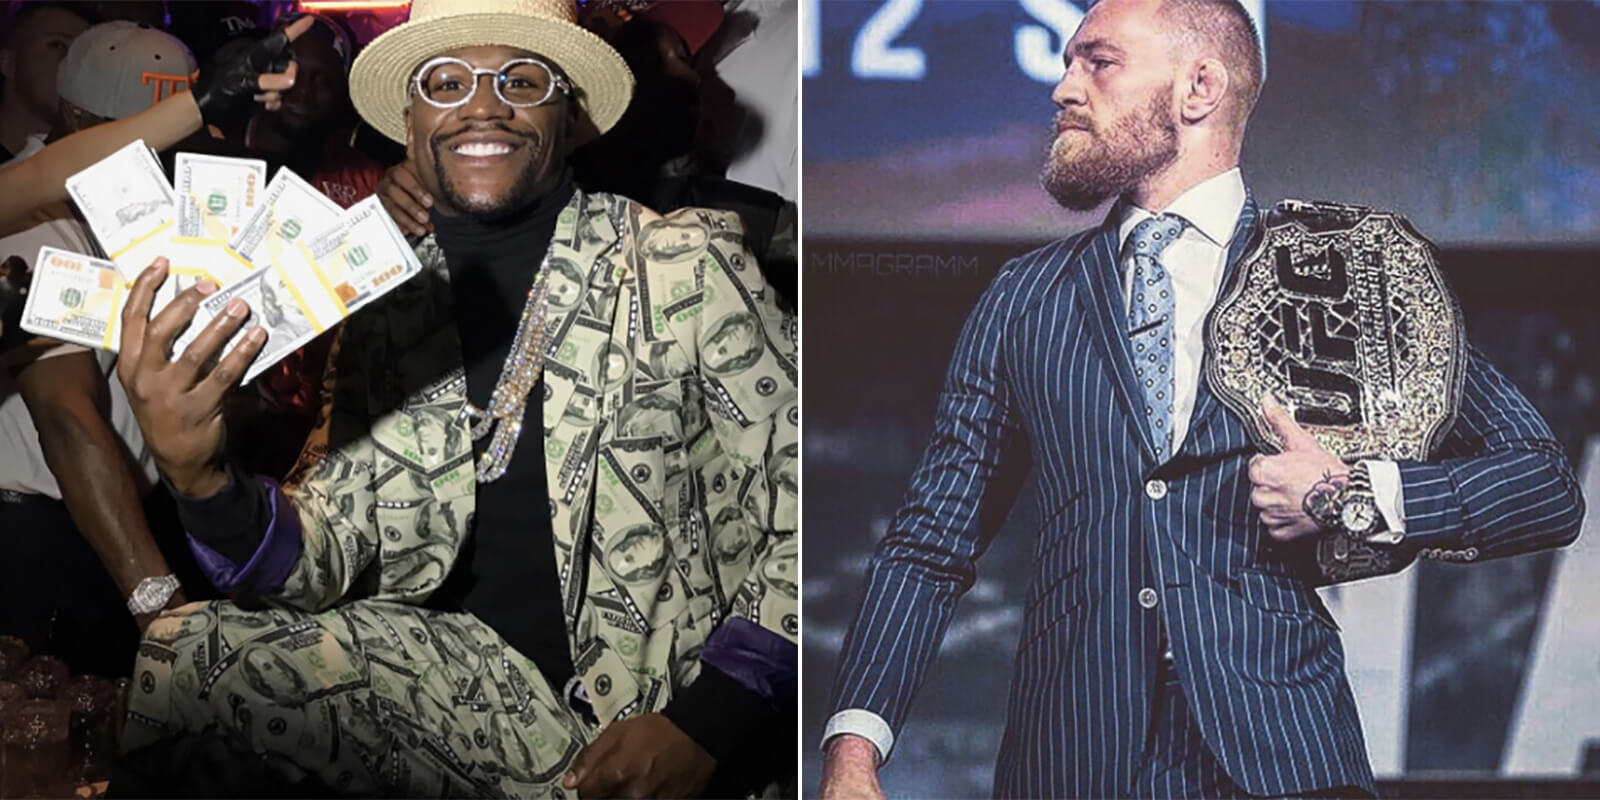 Floyd Mayweather Offers $10K On Instagram To Embarrass Conor McGregor1600 x 800